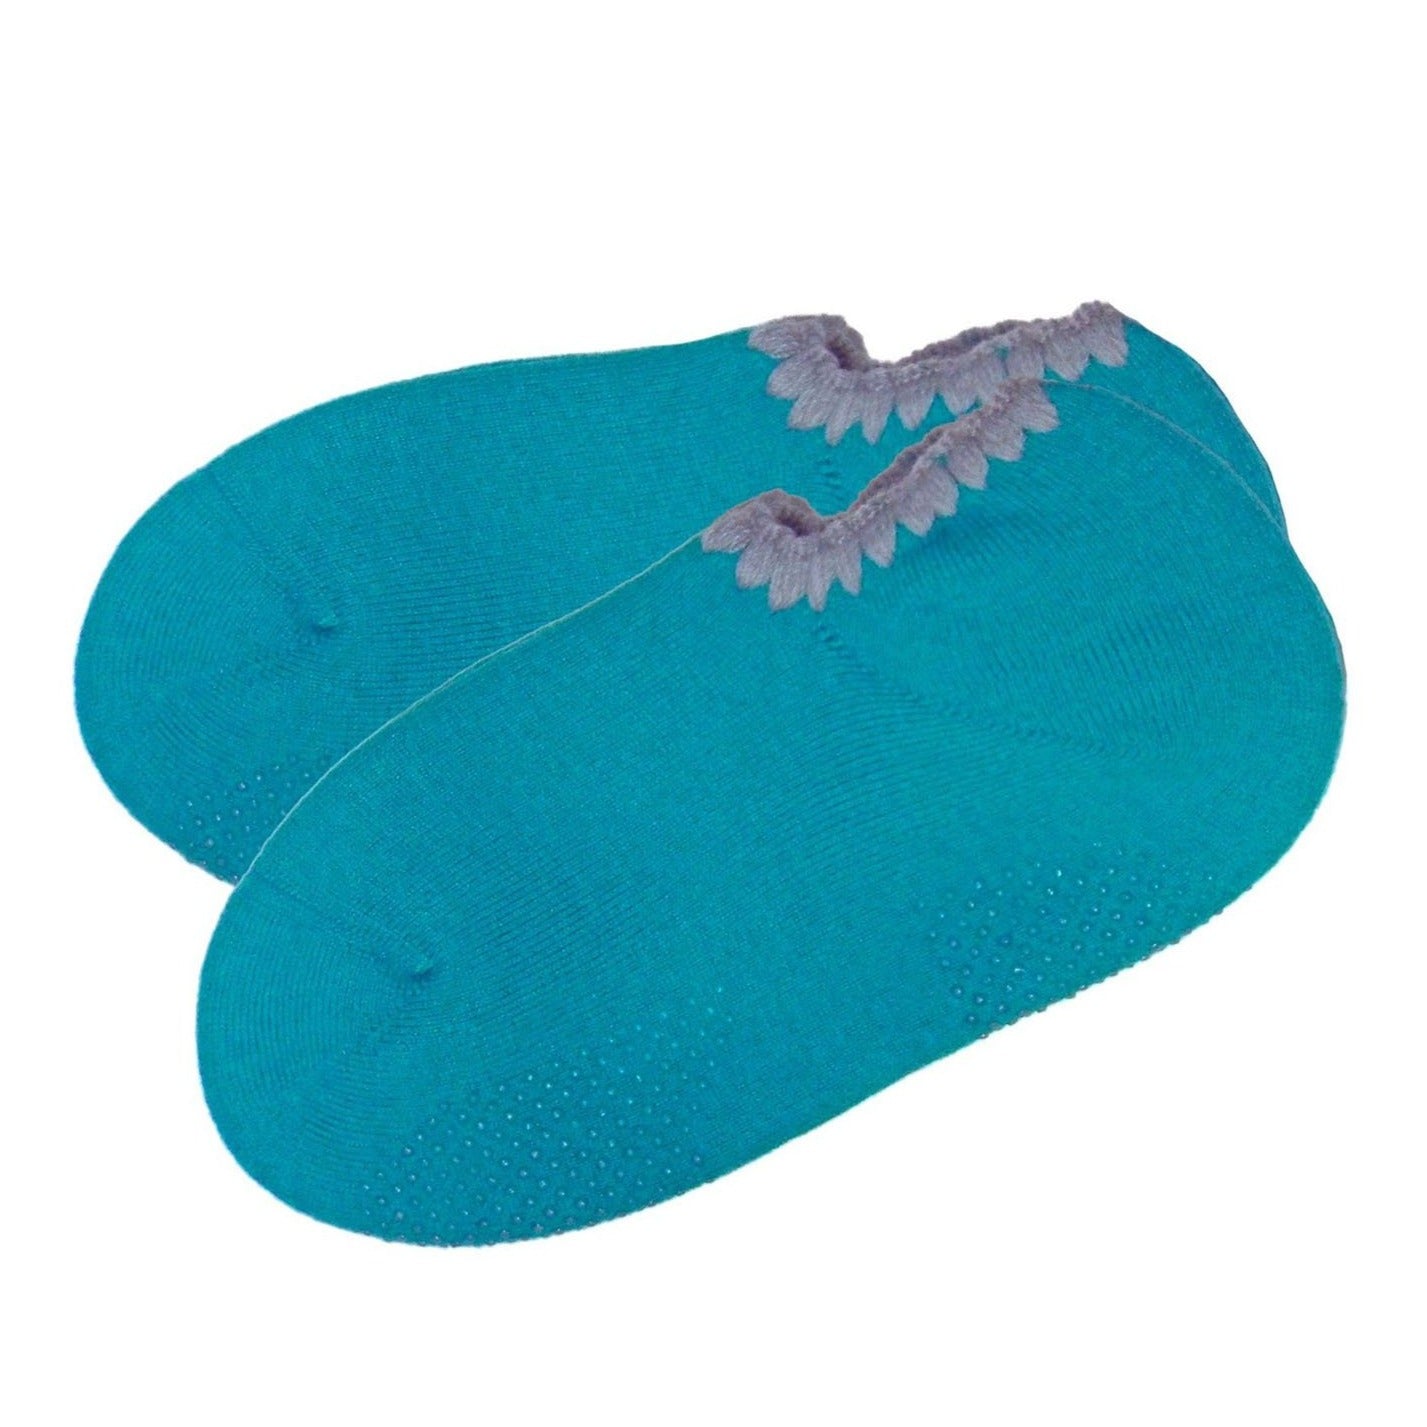 Durio Slipper Socks with Grippers for Women Palestine